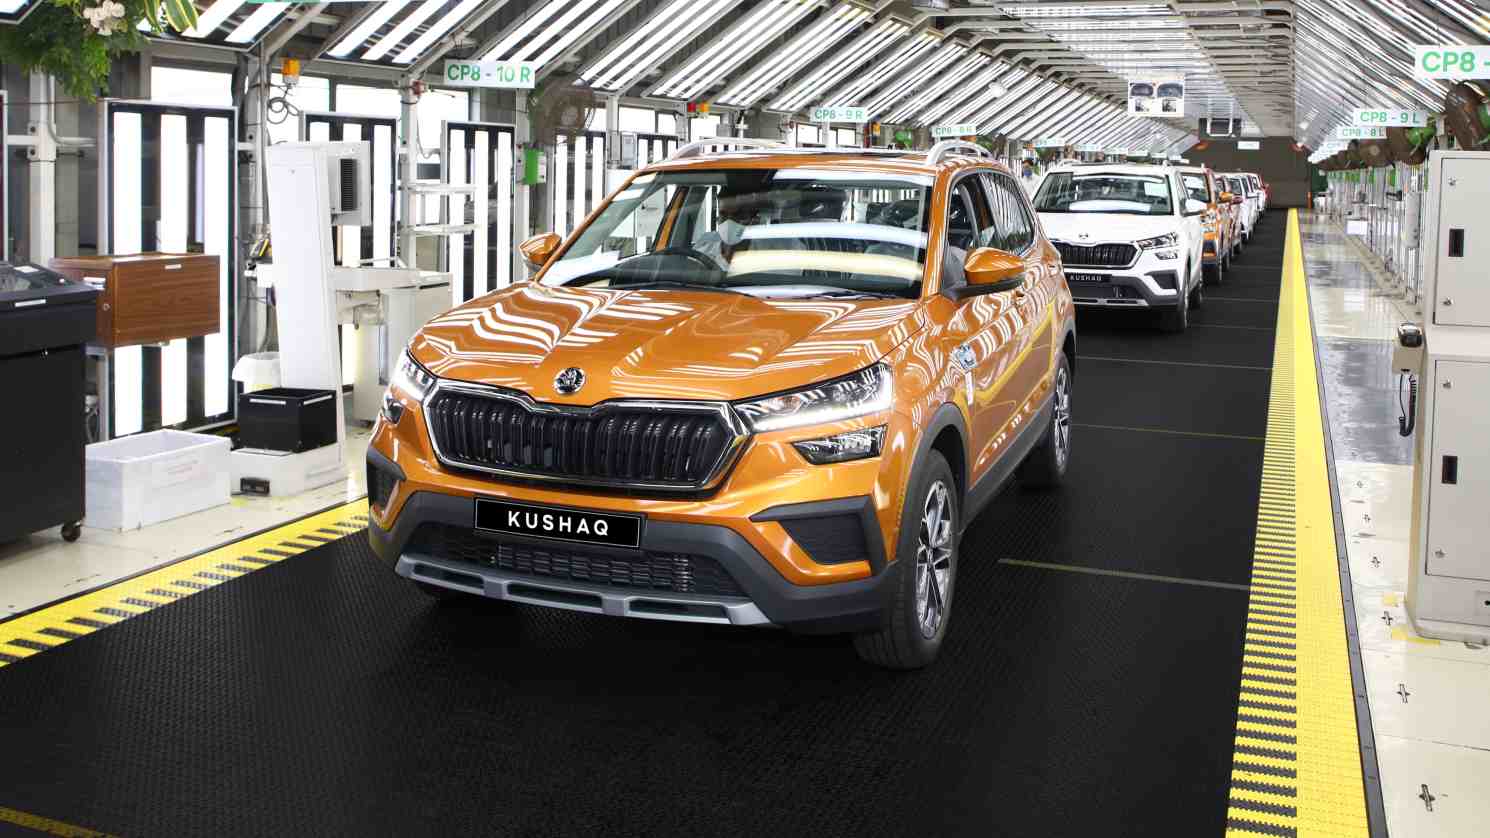 The Skoda Kushaq is set to be launched towards the end of June. Image: Skoda